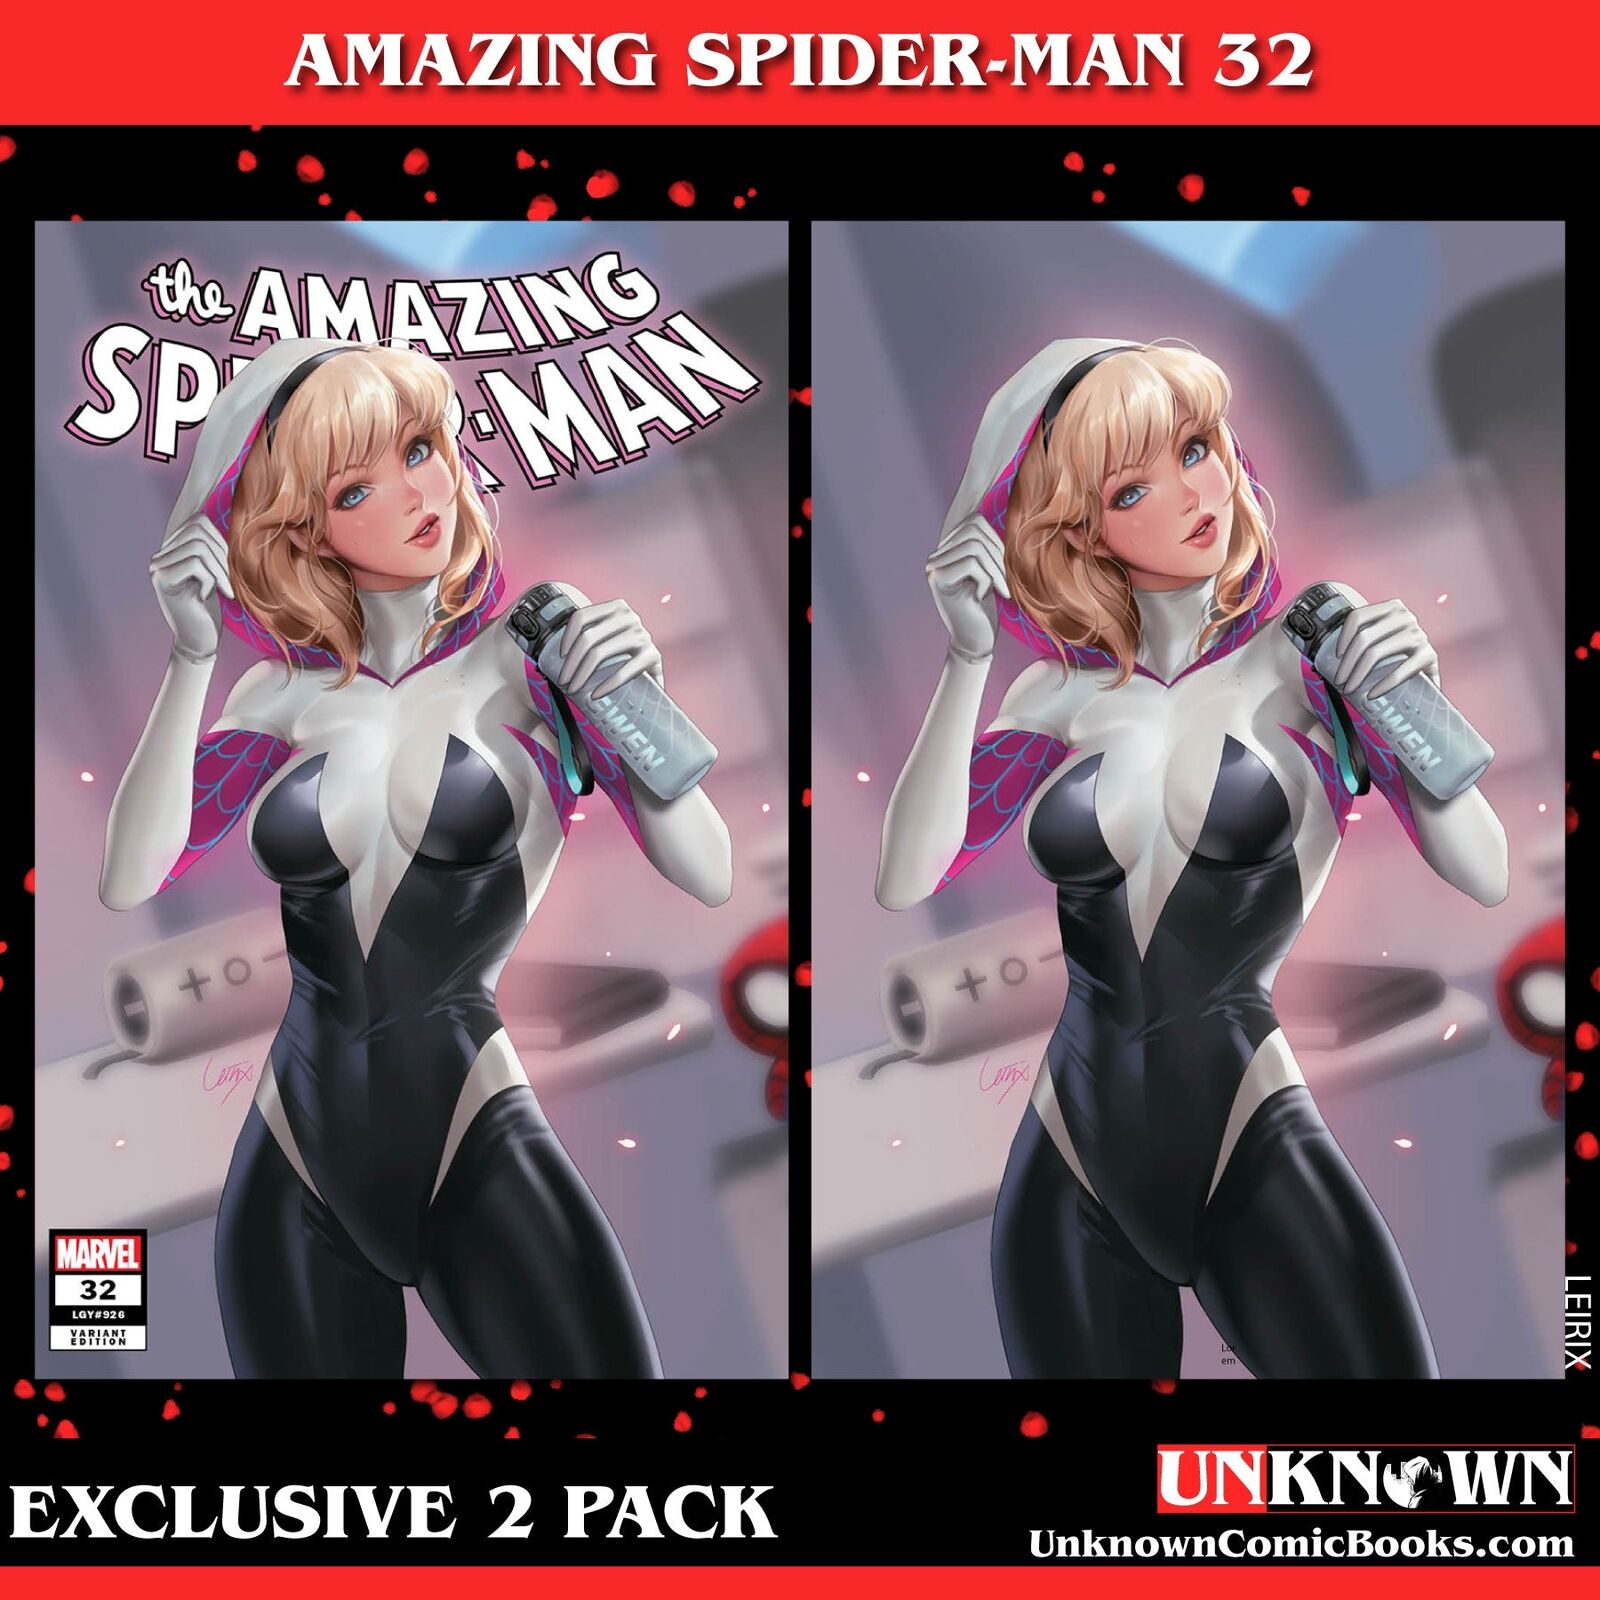 [2 PACK] AMAZING SPIDER-MAN #32 [G.O.D.S.] UNKNOWN COMICS LEIRIX EXCLUSIVE VAR (